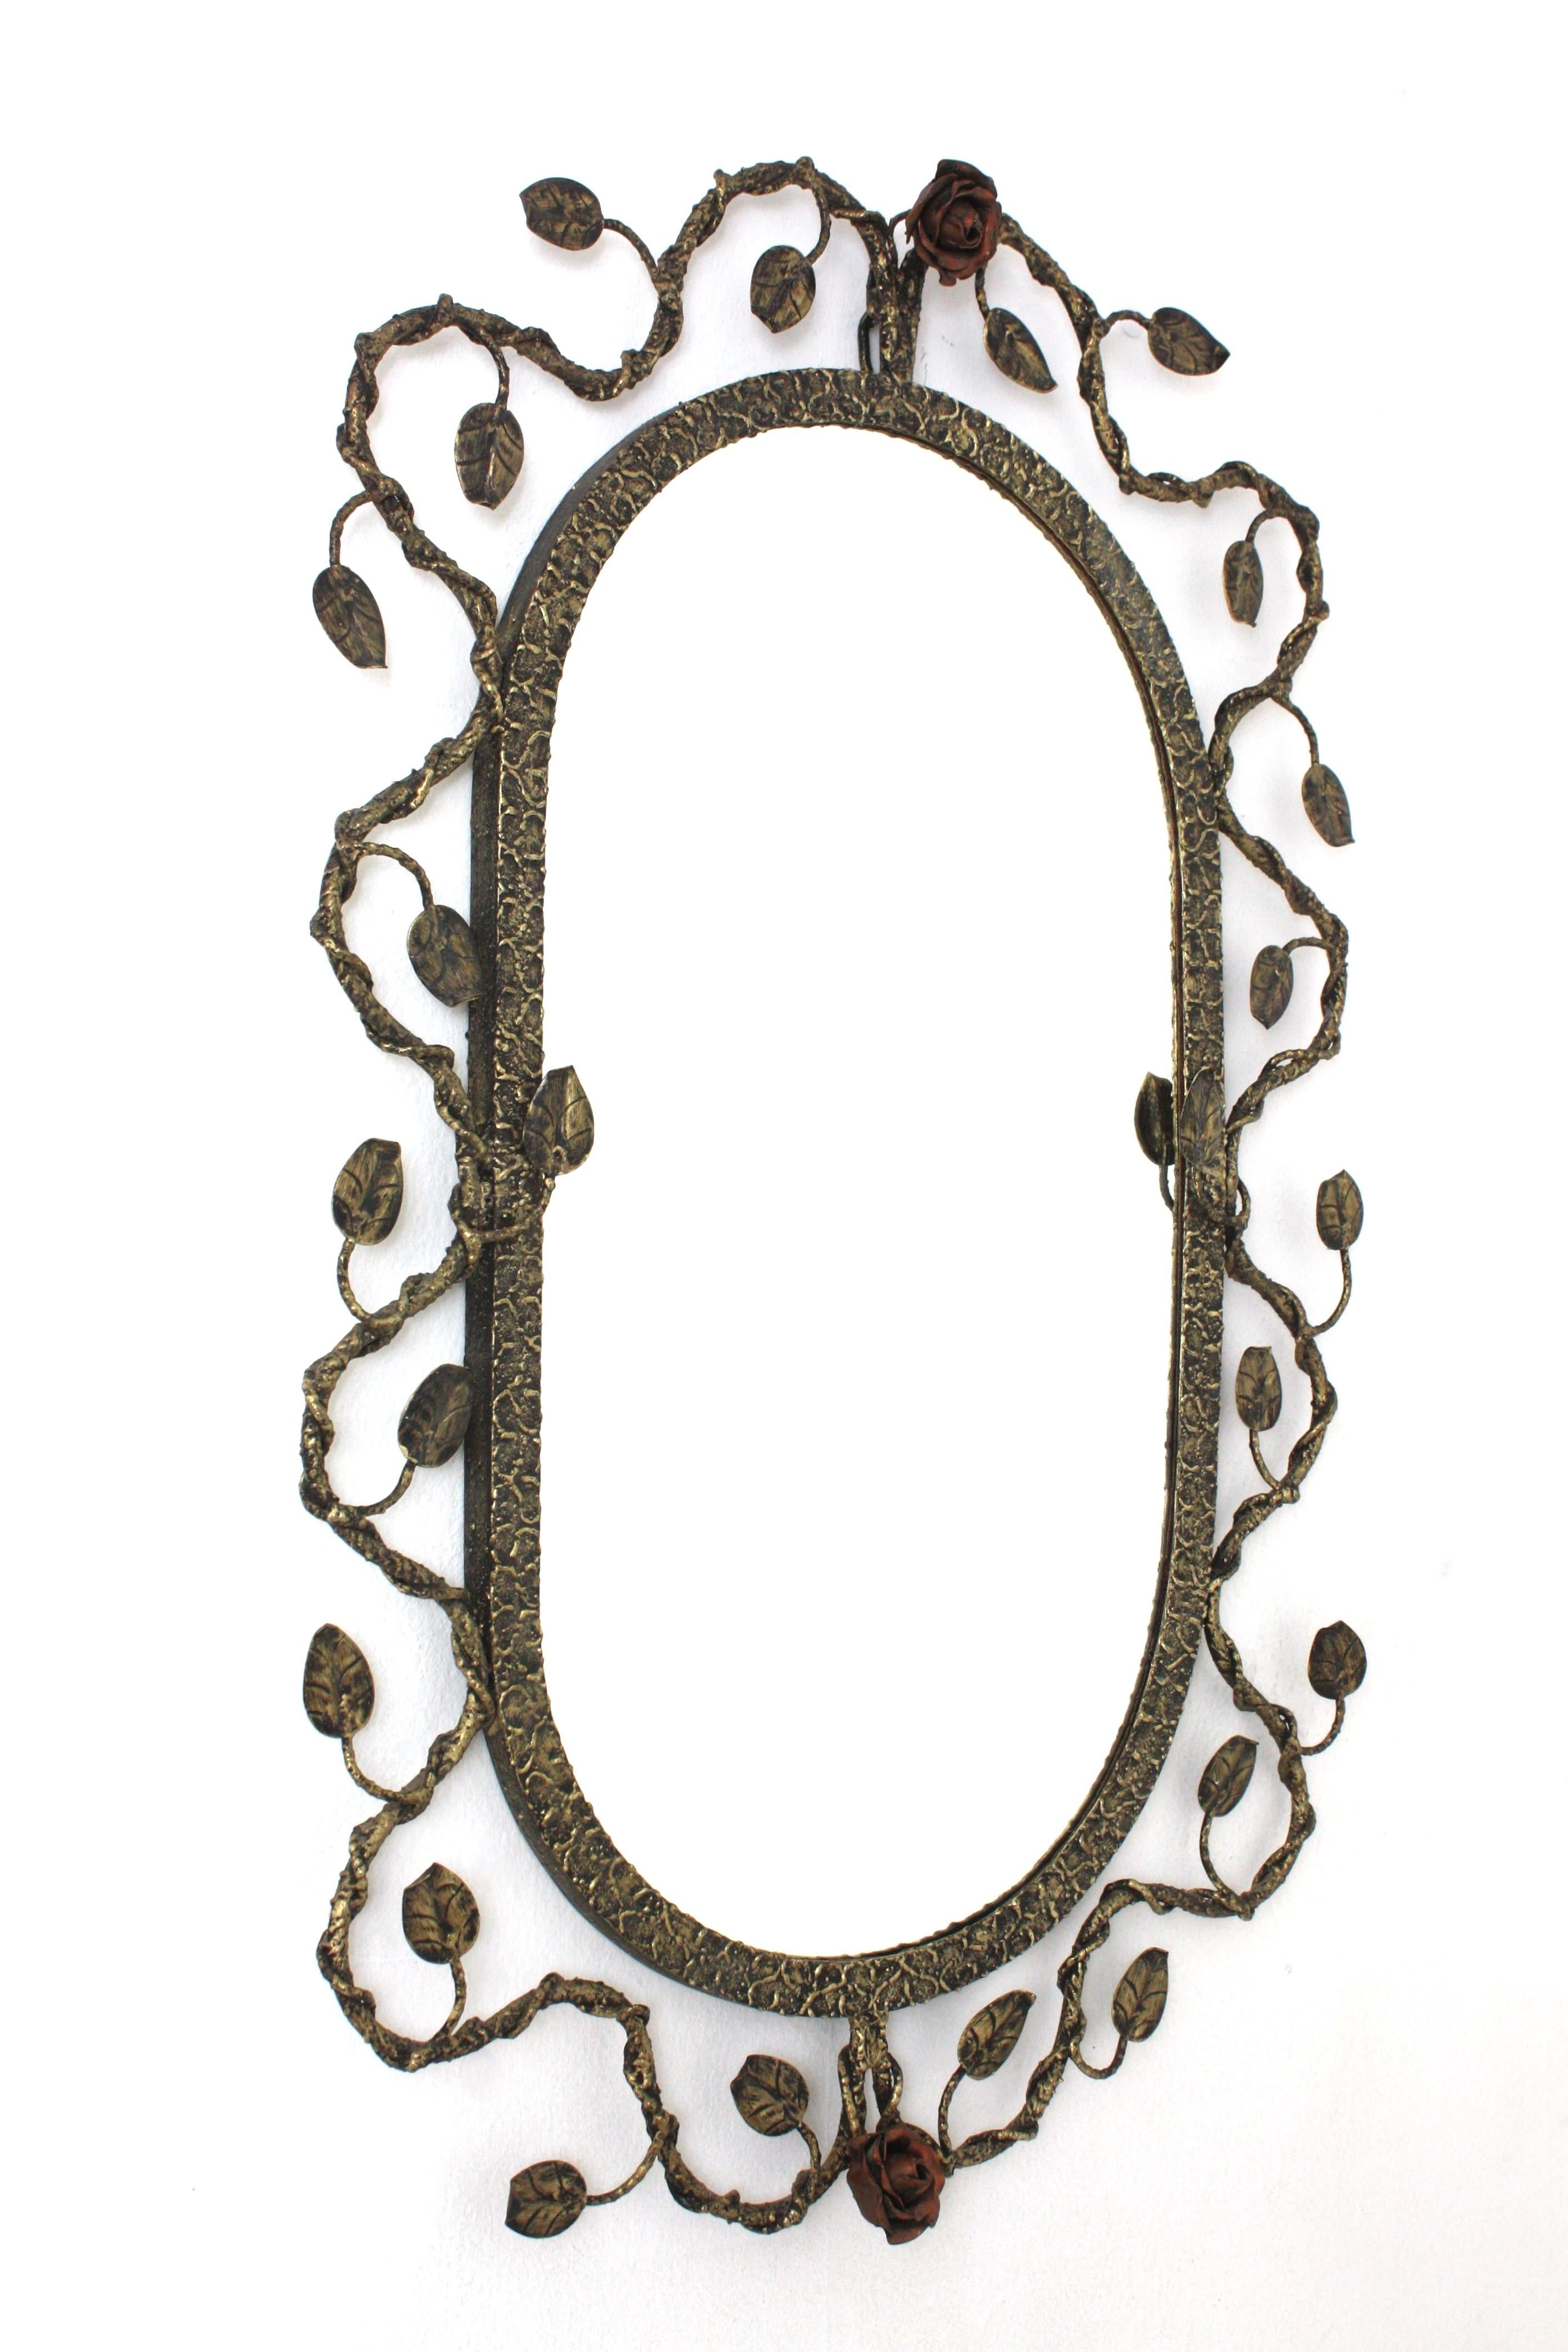 Hollywood Regency Oval Mirror in Gilt Iron with Foliage Floral Motifs, 1950s For Sale